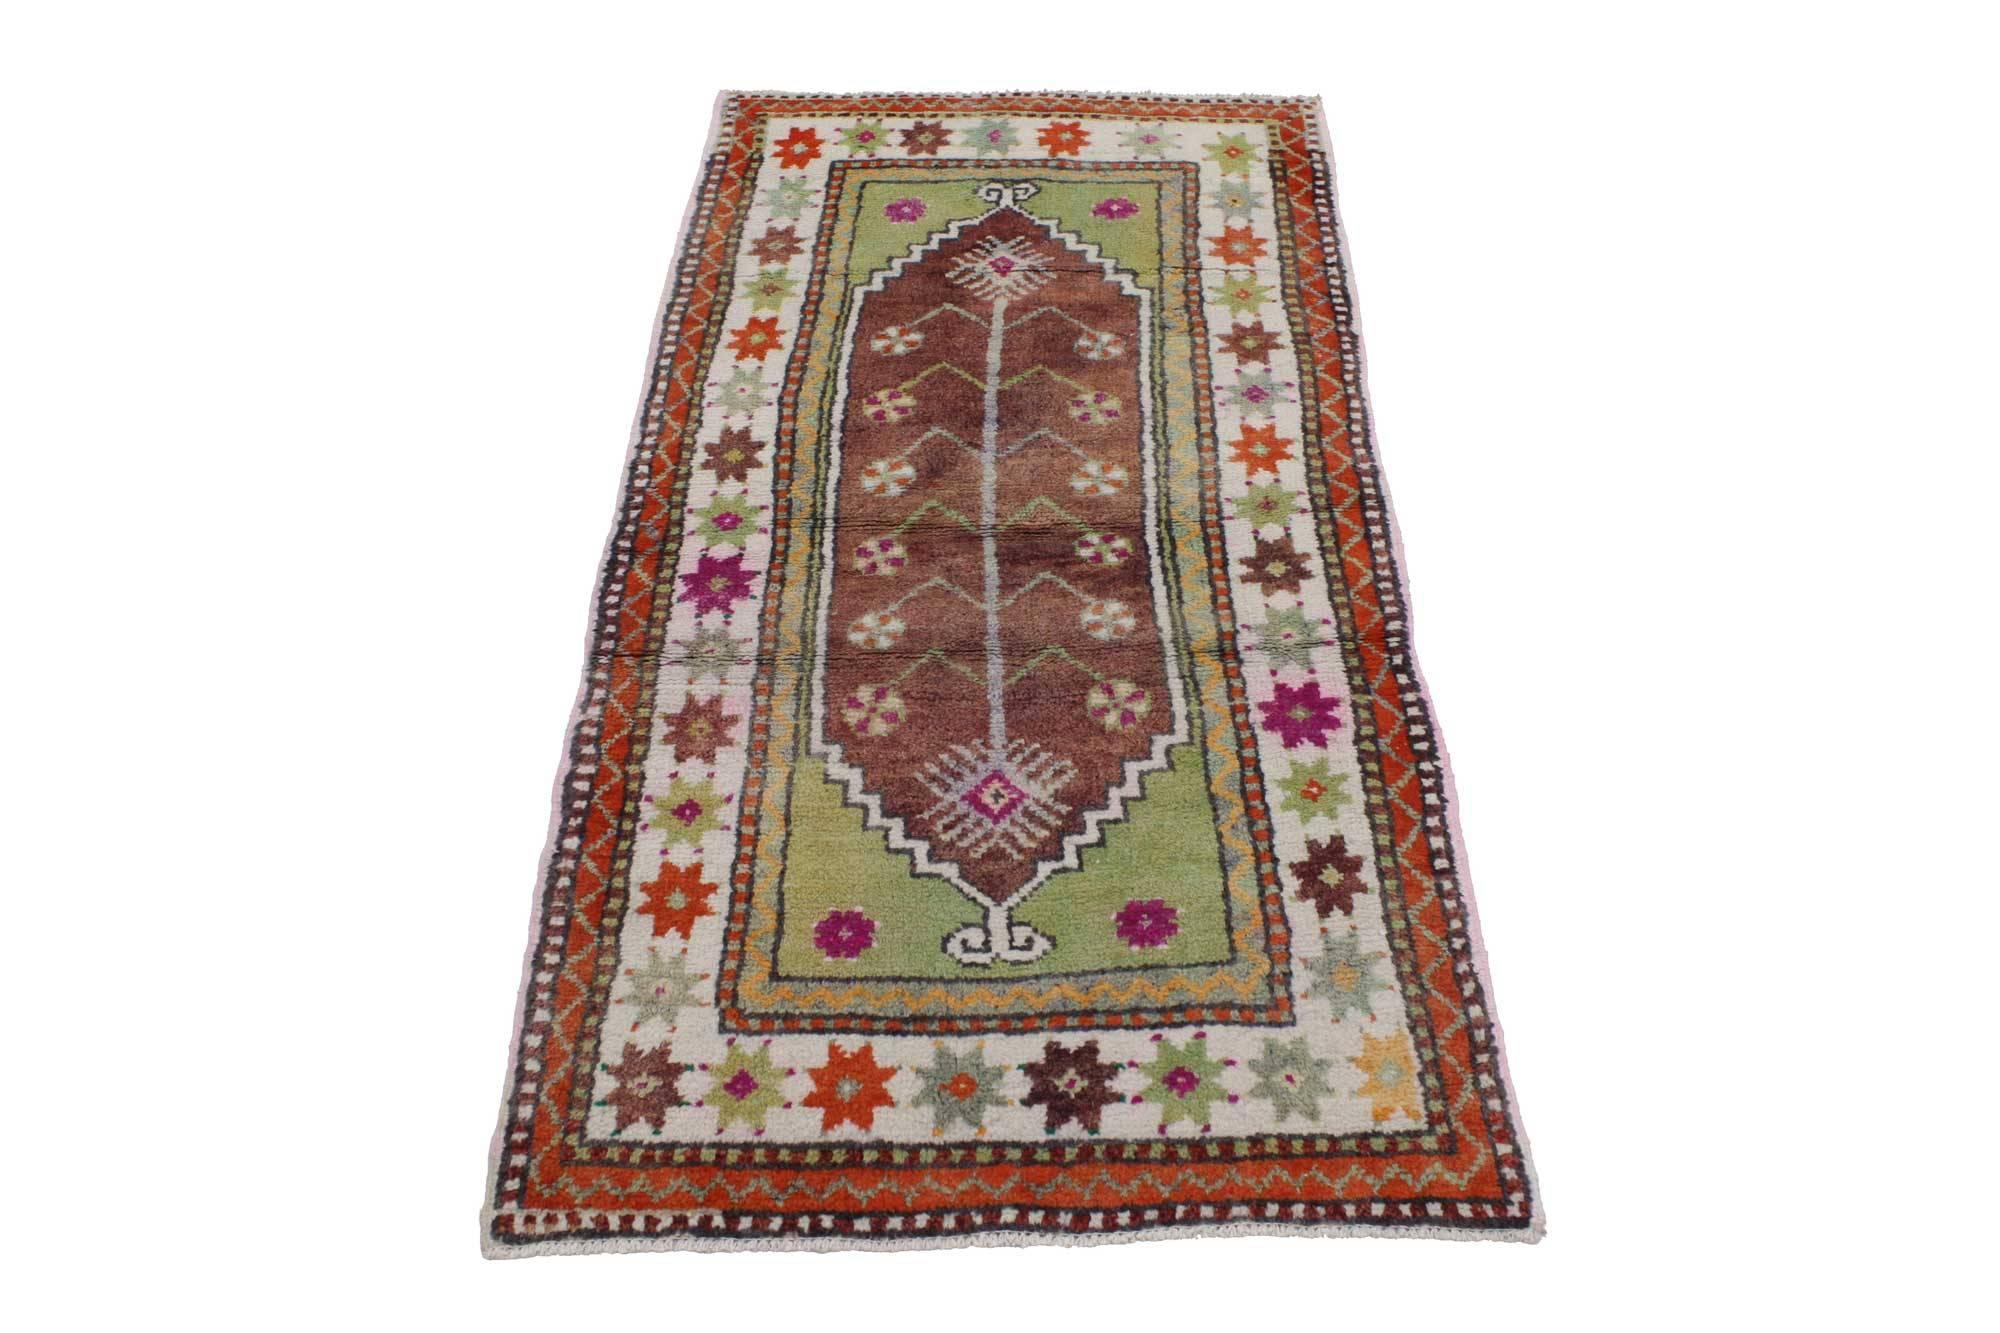 51759, vintage Turkish Oushak rug, colorful rug for kitchen bath, foyer or entryway. This vintage Turkish Oushak rug features a modern traditional style. Immersed in Anatolian history and refined colors, this vintage Oushak rug combines simplicity